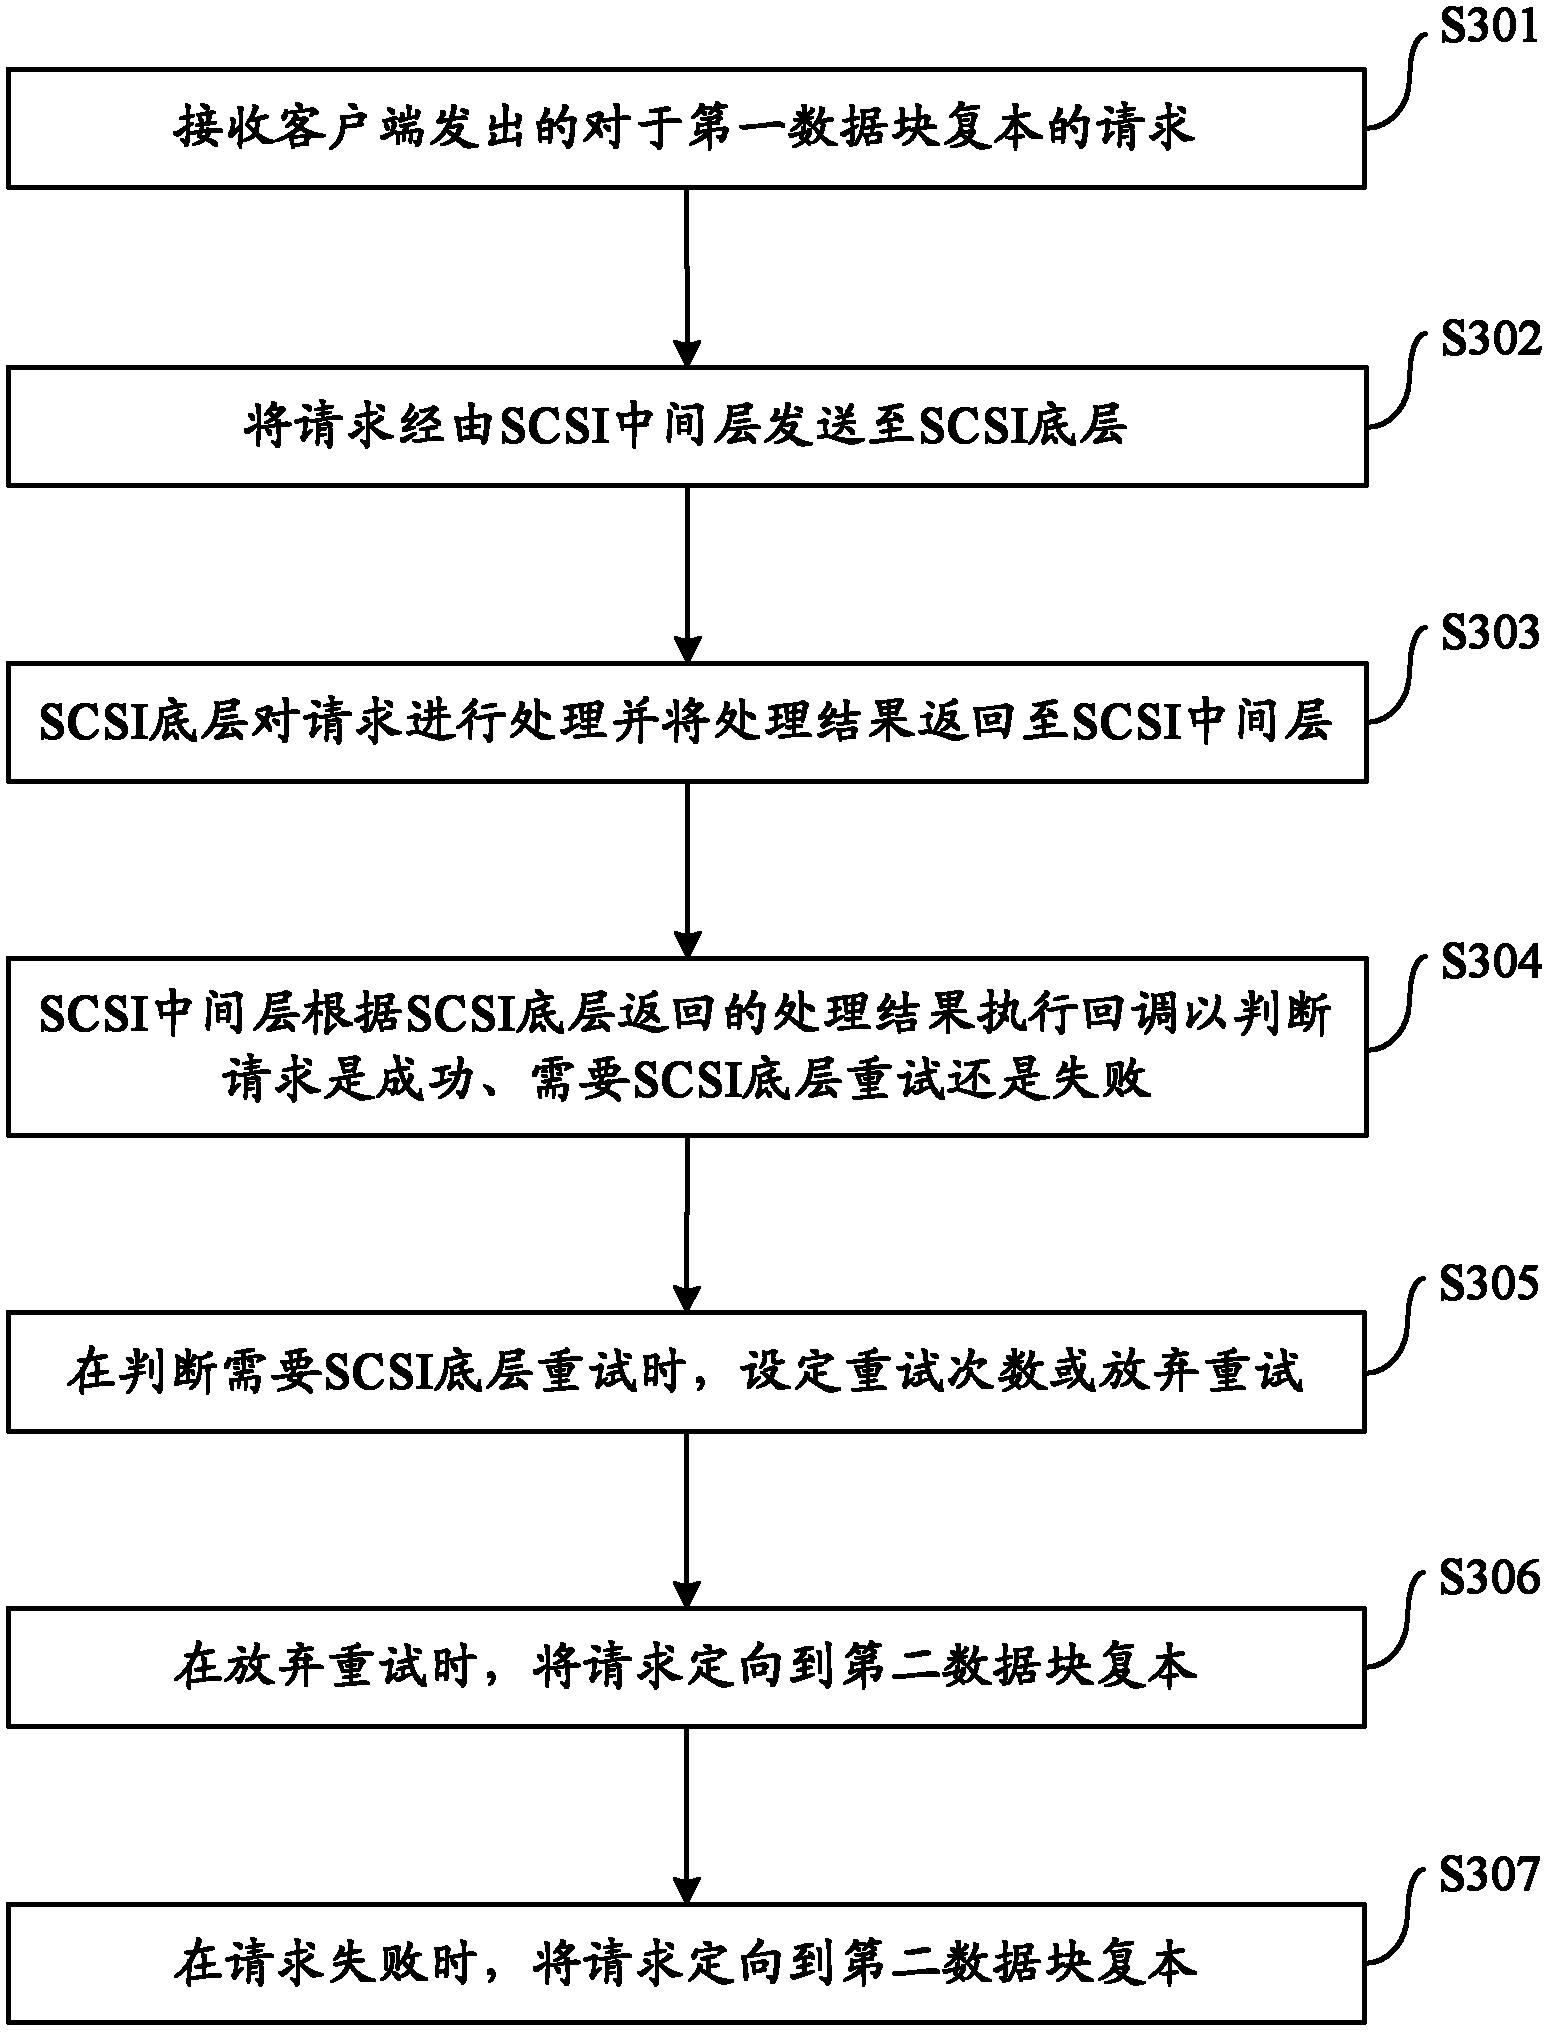 Small computer system interface (SCSI) fault-tolerant optimization method and device based on hadoop distributed file system (HDFS)